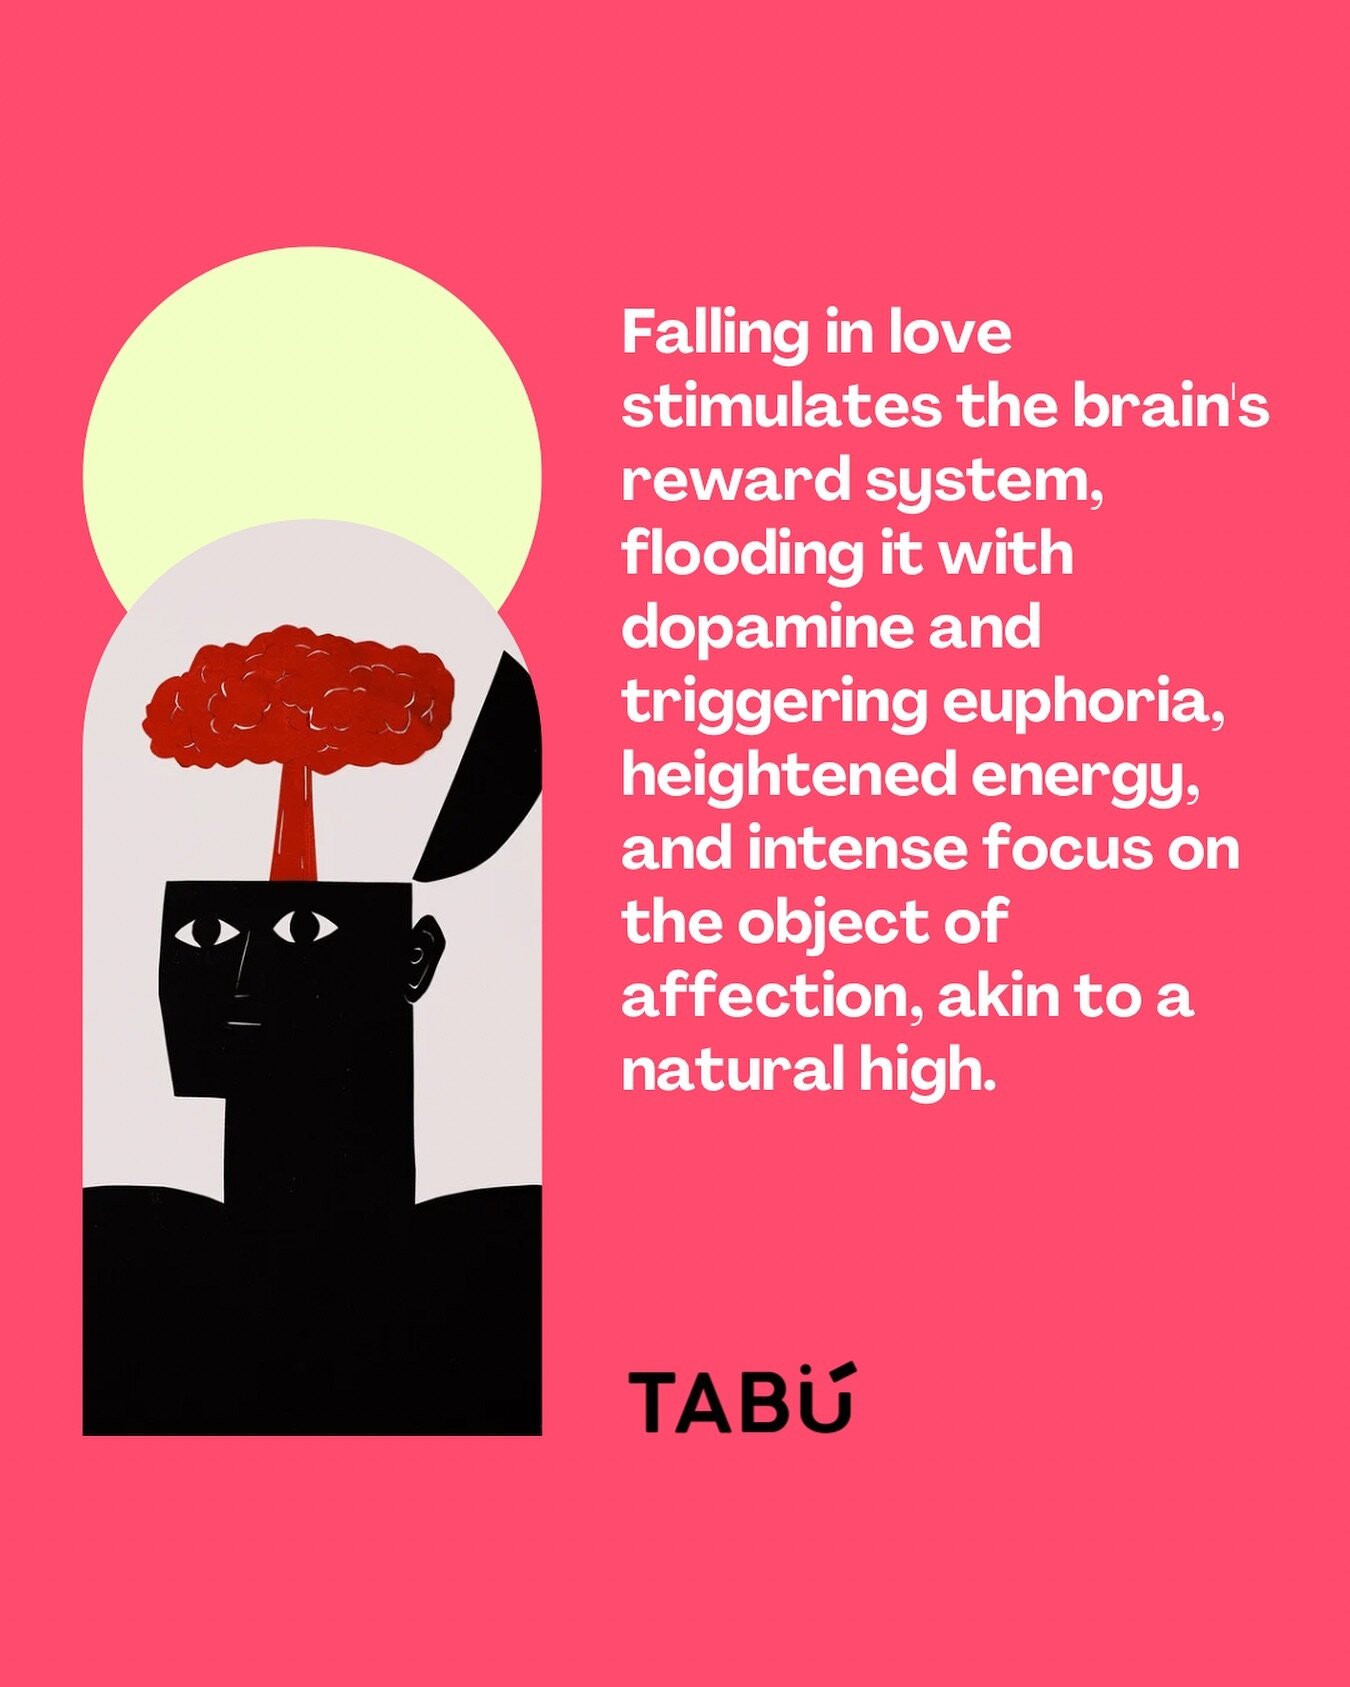 Yes, you can feel &ldquo;high&rdquo; on love. That head-over-heels feeling, the obsessive thoughts, the constant giddiness - it&rsquo;s not just that you (may have) found the love of your life, it&rsquo;s your brain flooded with dopamine, the &ldquo;